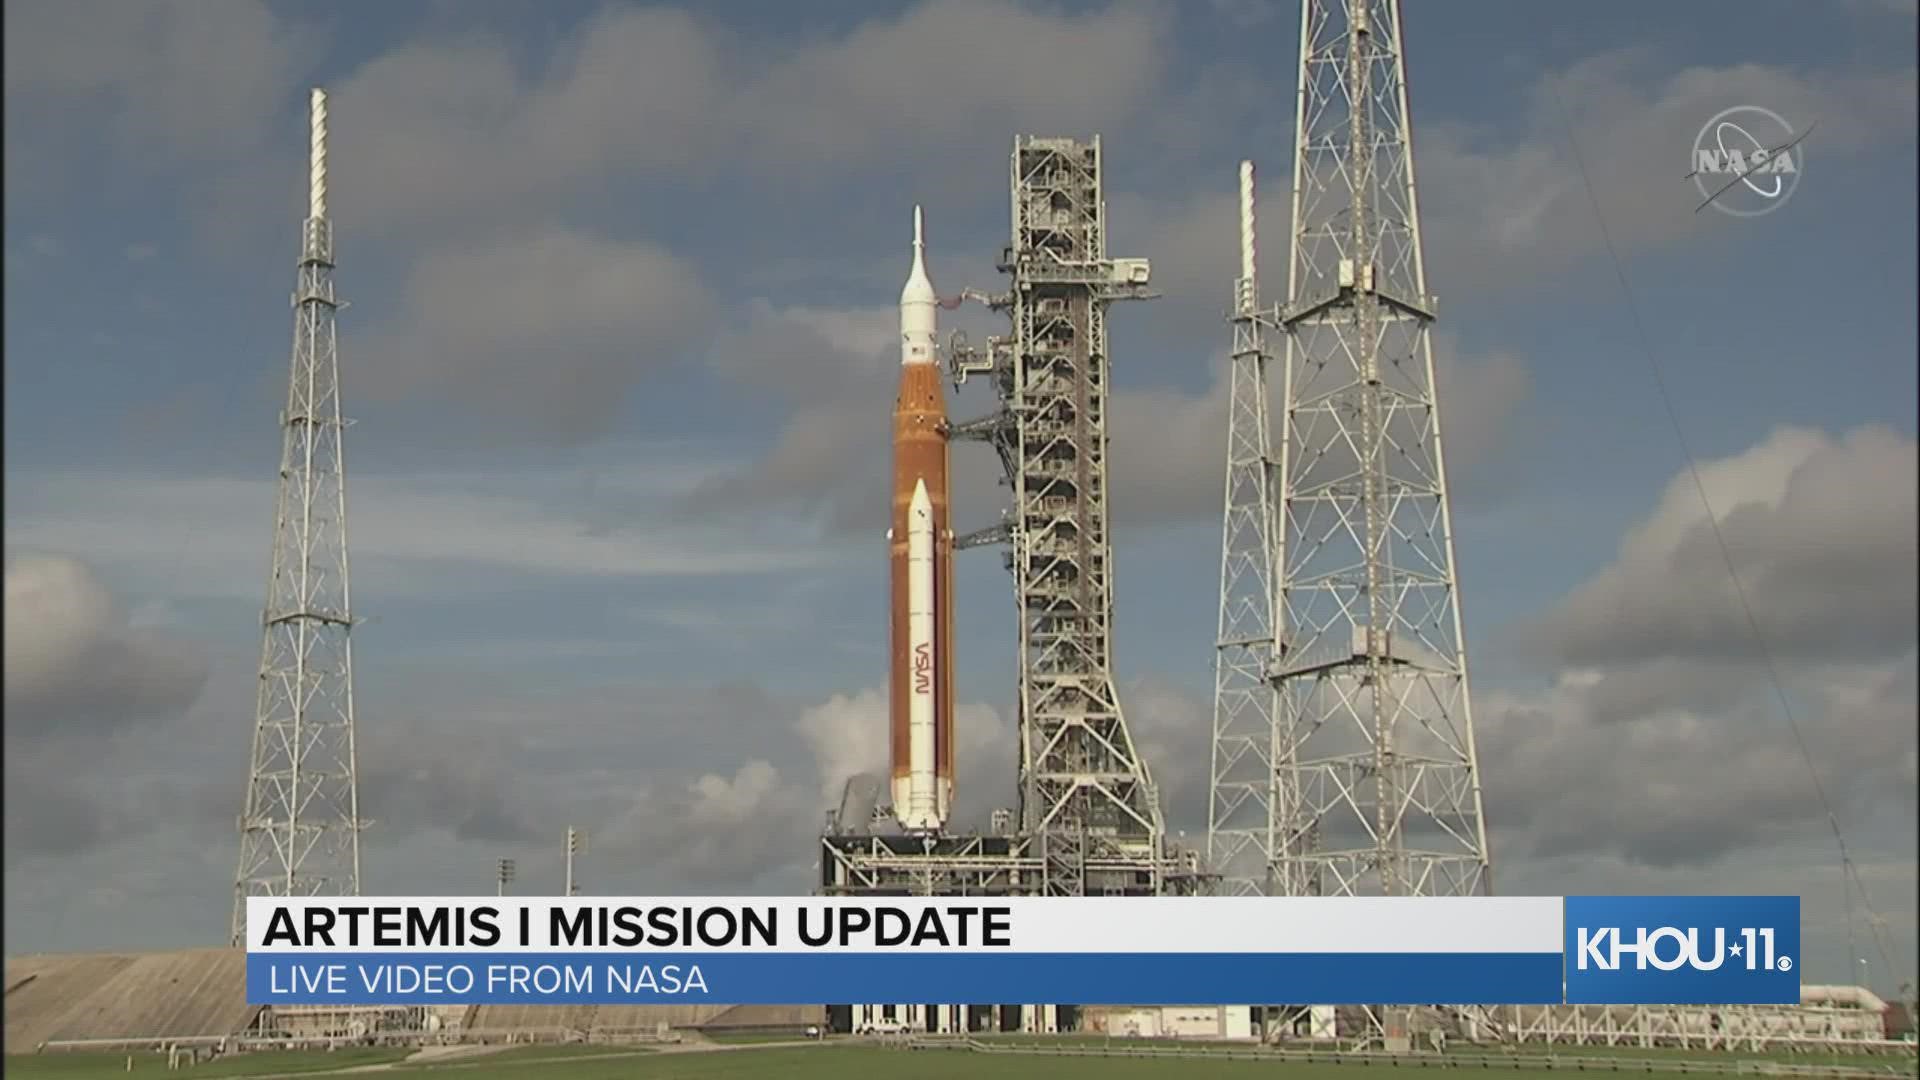 Liftoff is scheduled for Monday, August 29, in from Florida. This is an update NASA officials gave the day before the launch.